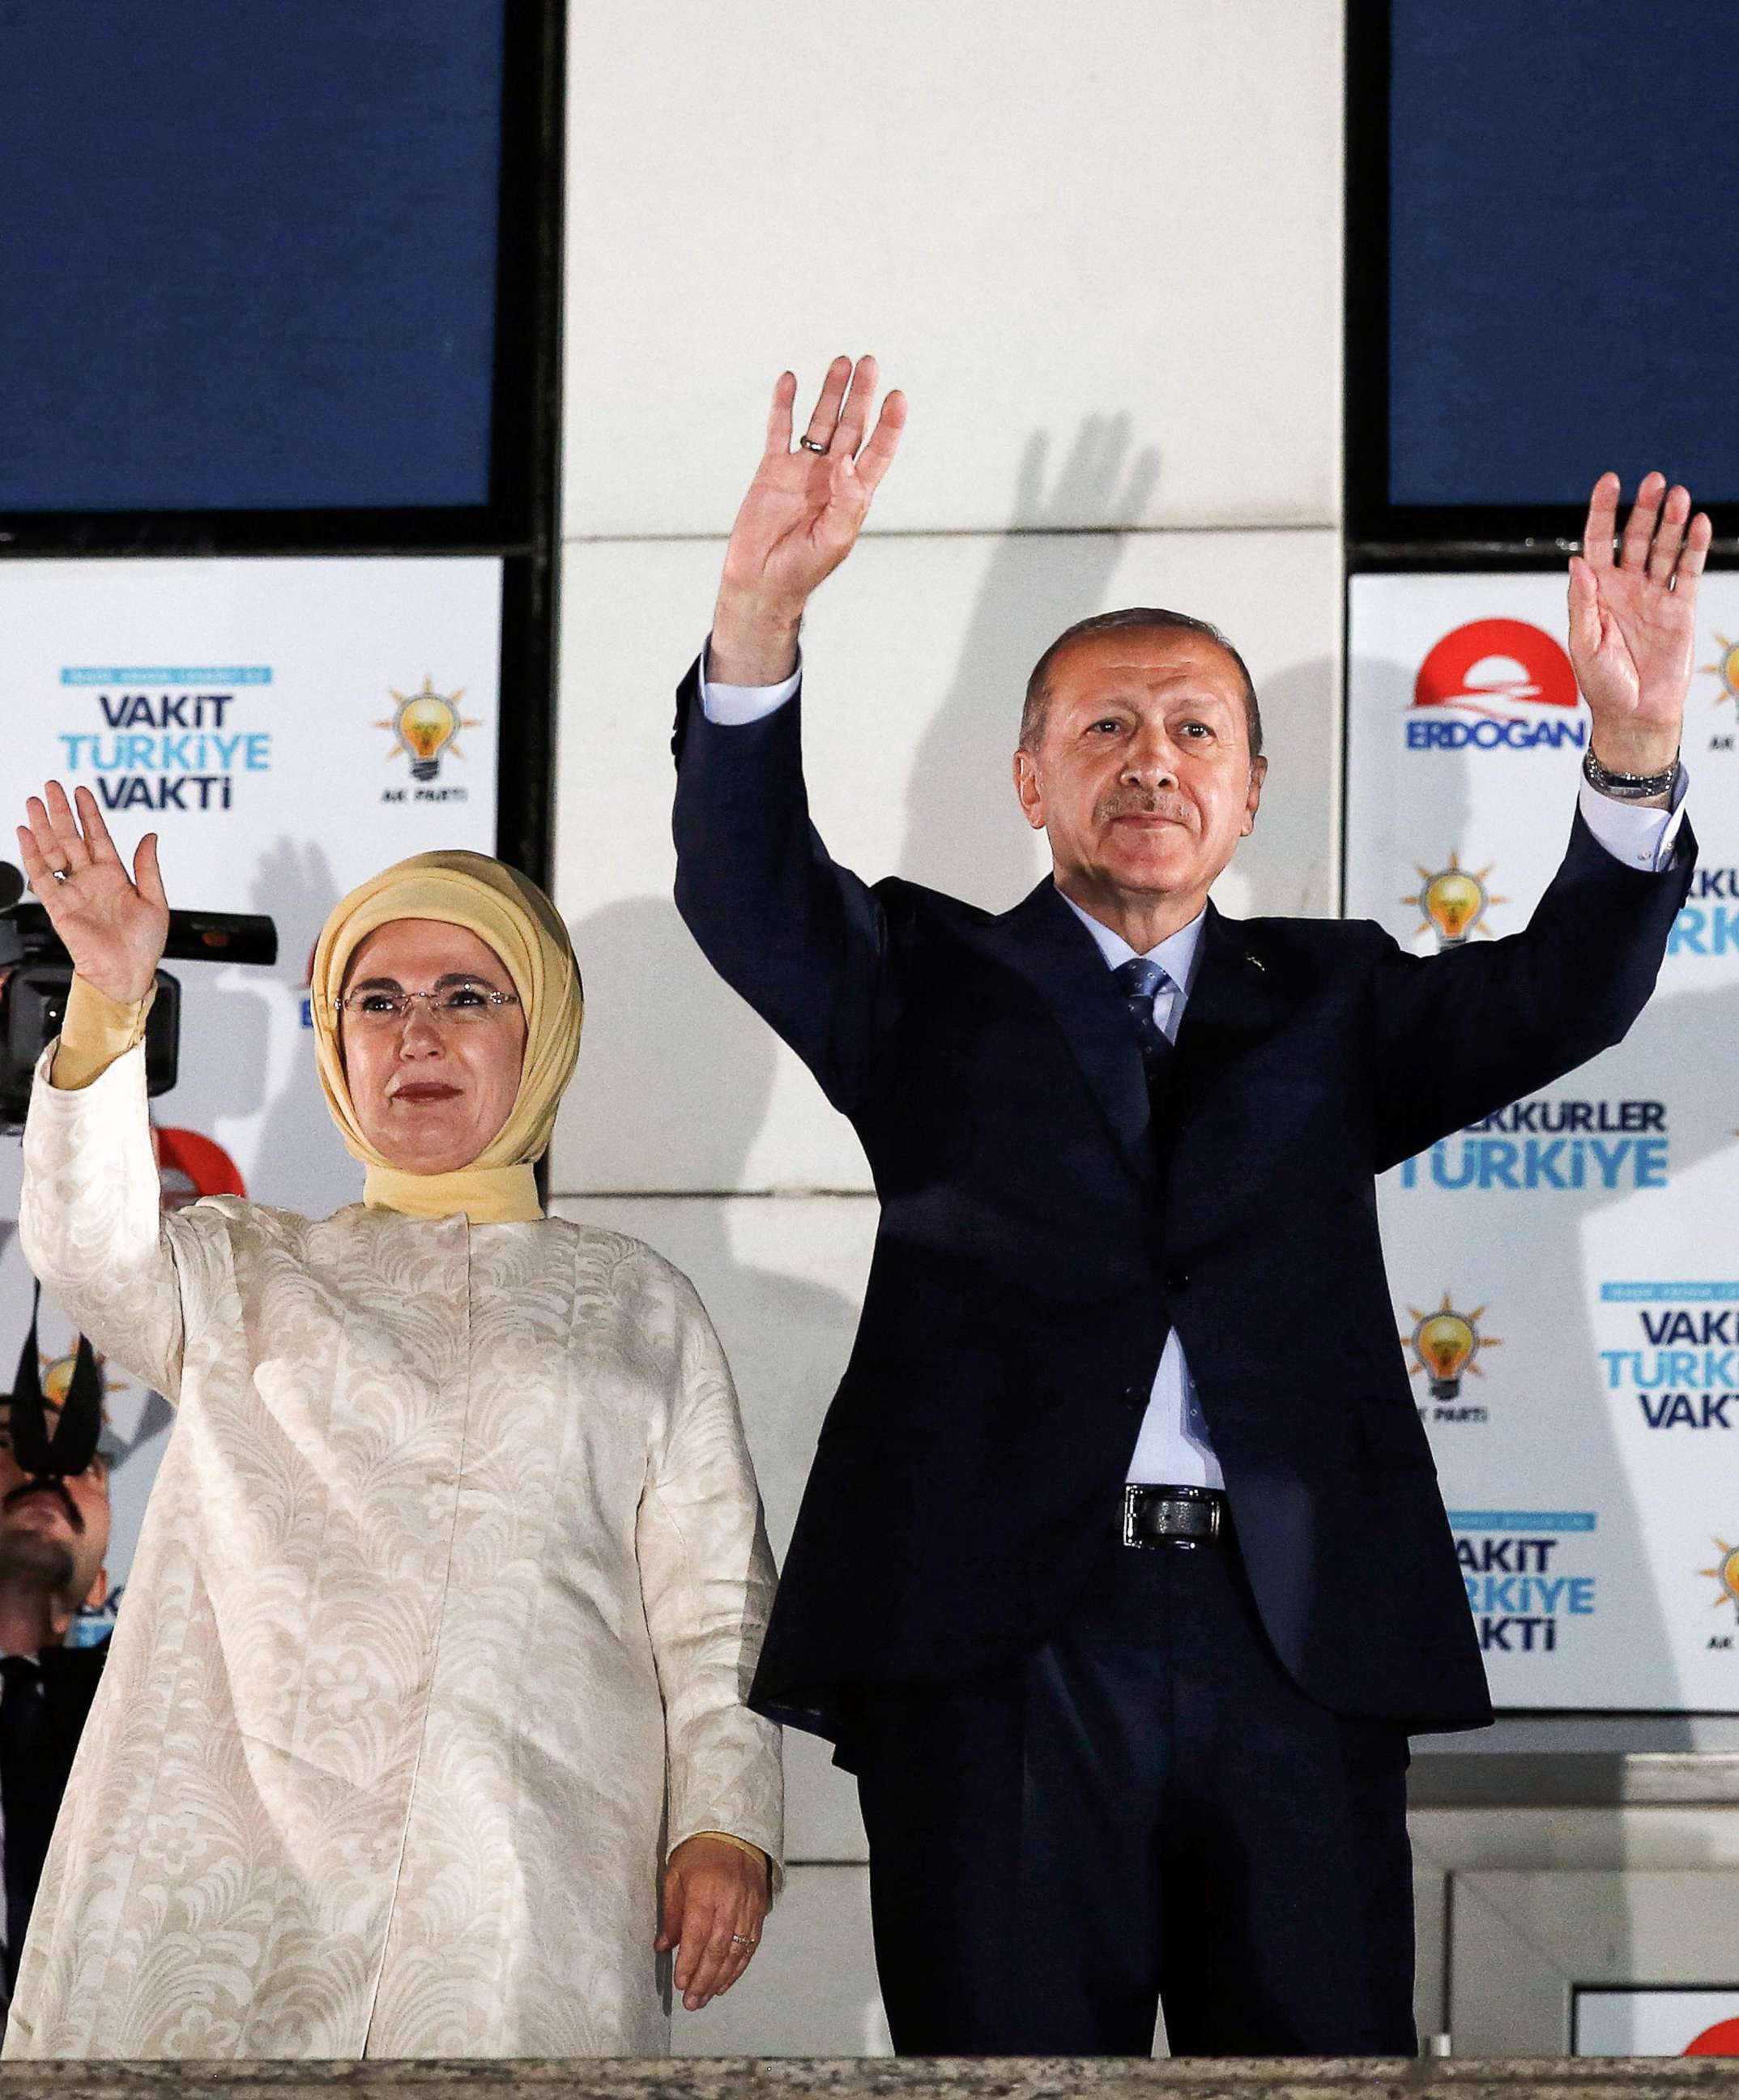 PHOTO: Turkish President Tayyip Erdogan and his wife Emine Erdogan greet supporters gathered above a balcony at the headquarters of the AK Party in Ankara, June 24, 2018 as they celebrate Erdogan winning five more years.